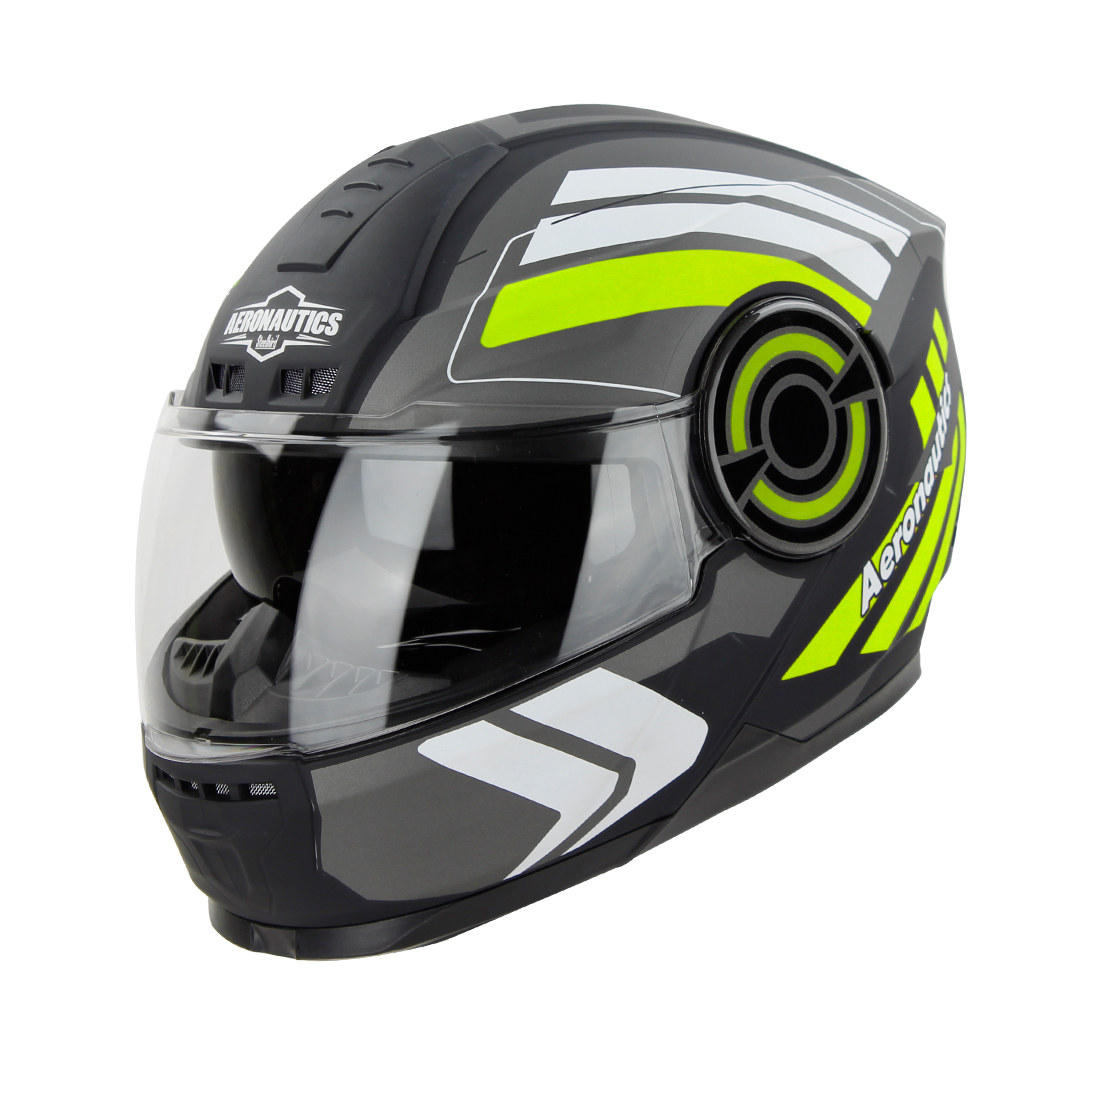 Steelbird SBH-40 Vanguard ISI Certified Full Face Graphic Helmet For Men And Women With Inner Sun Shield (Glossy Black Neon)